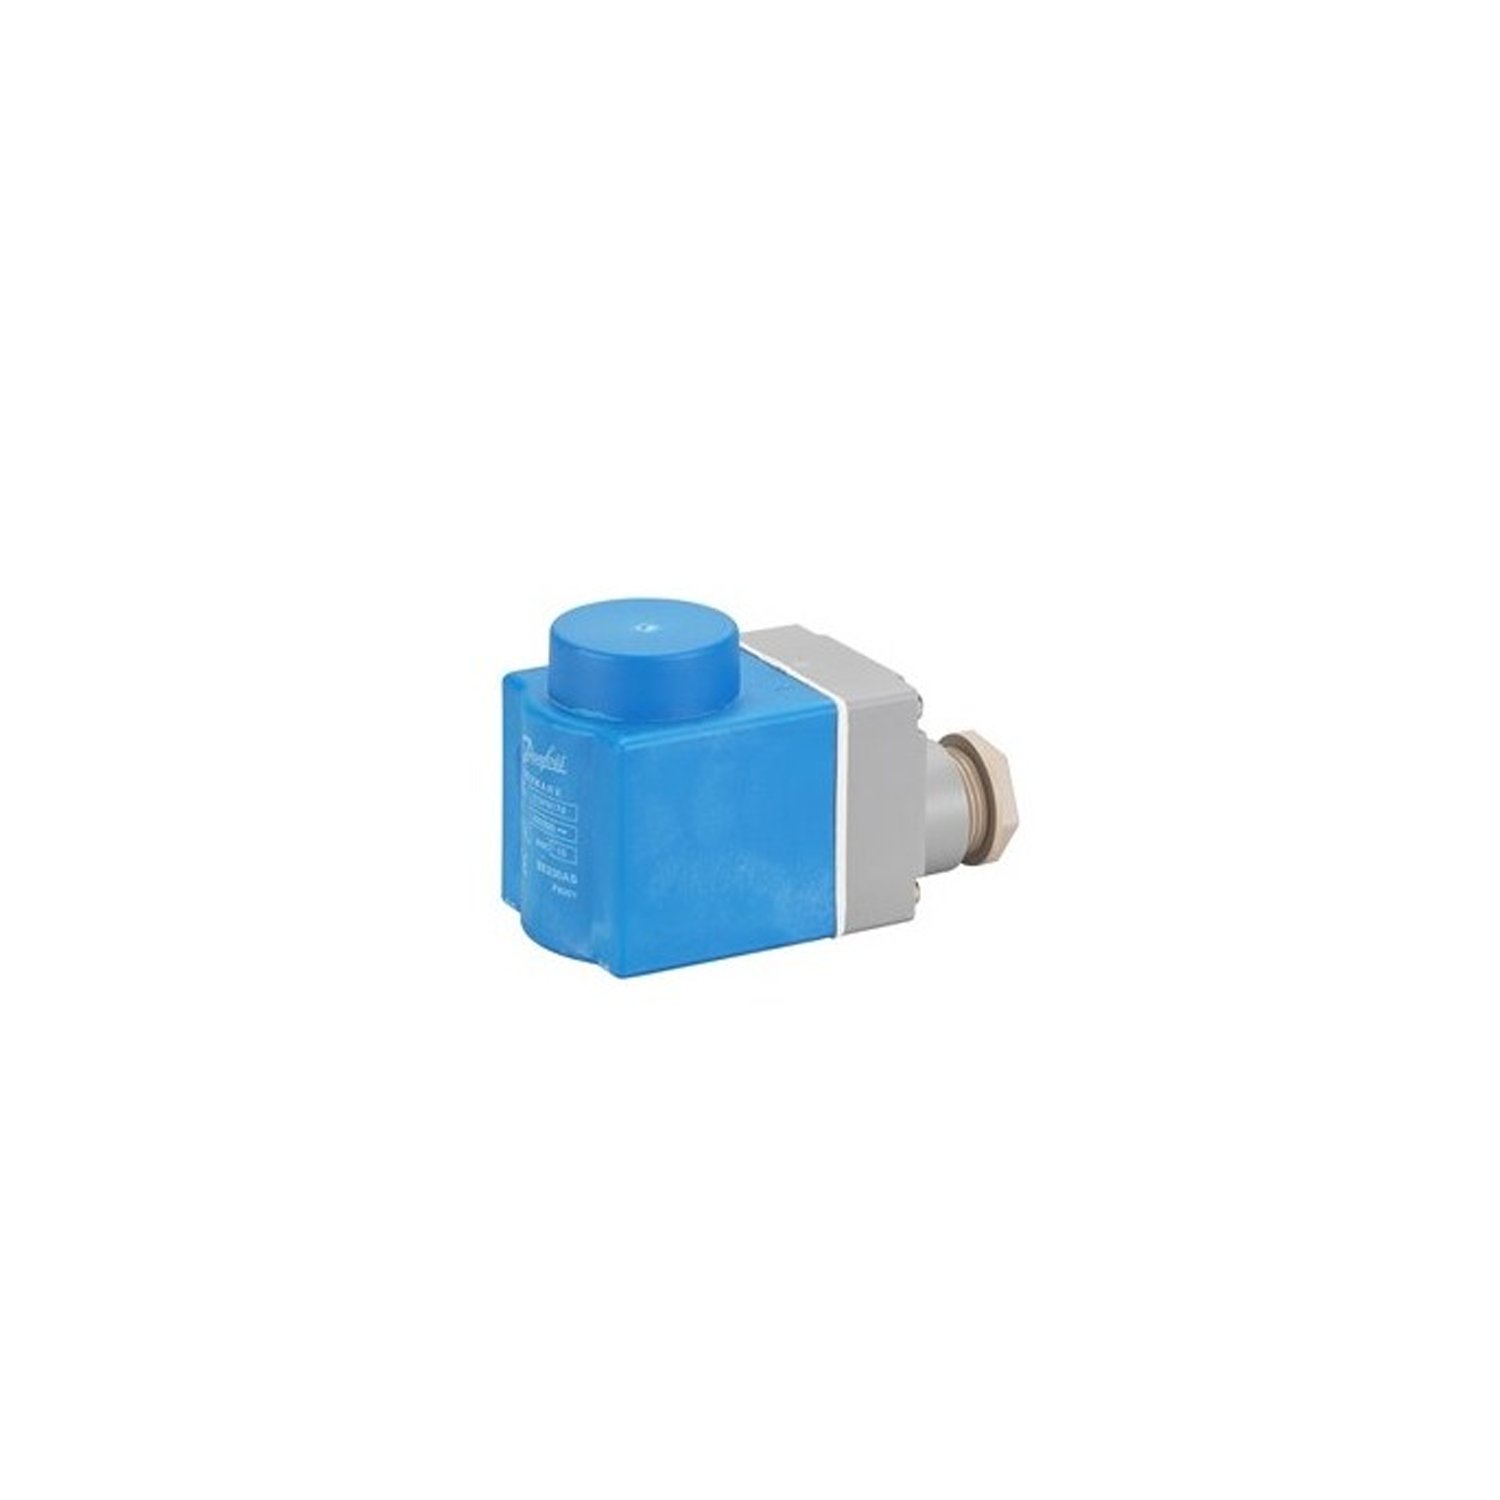 Solenoid valve coil Danfoss EVR, 240 V, without cable, 50 Hz, 11W, IP67